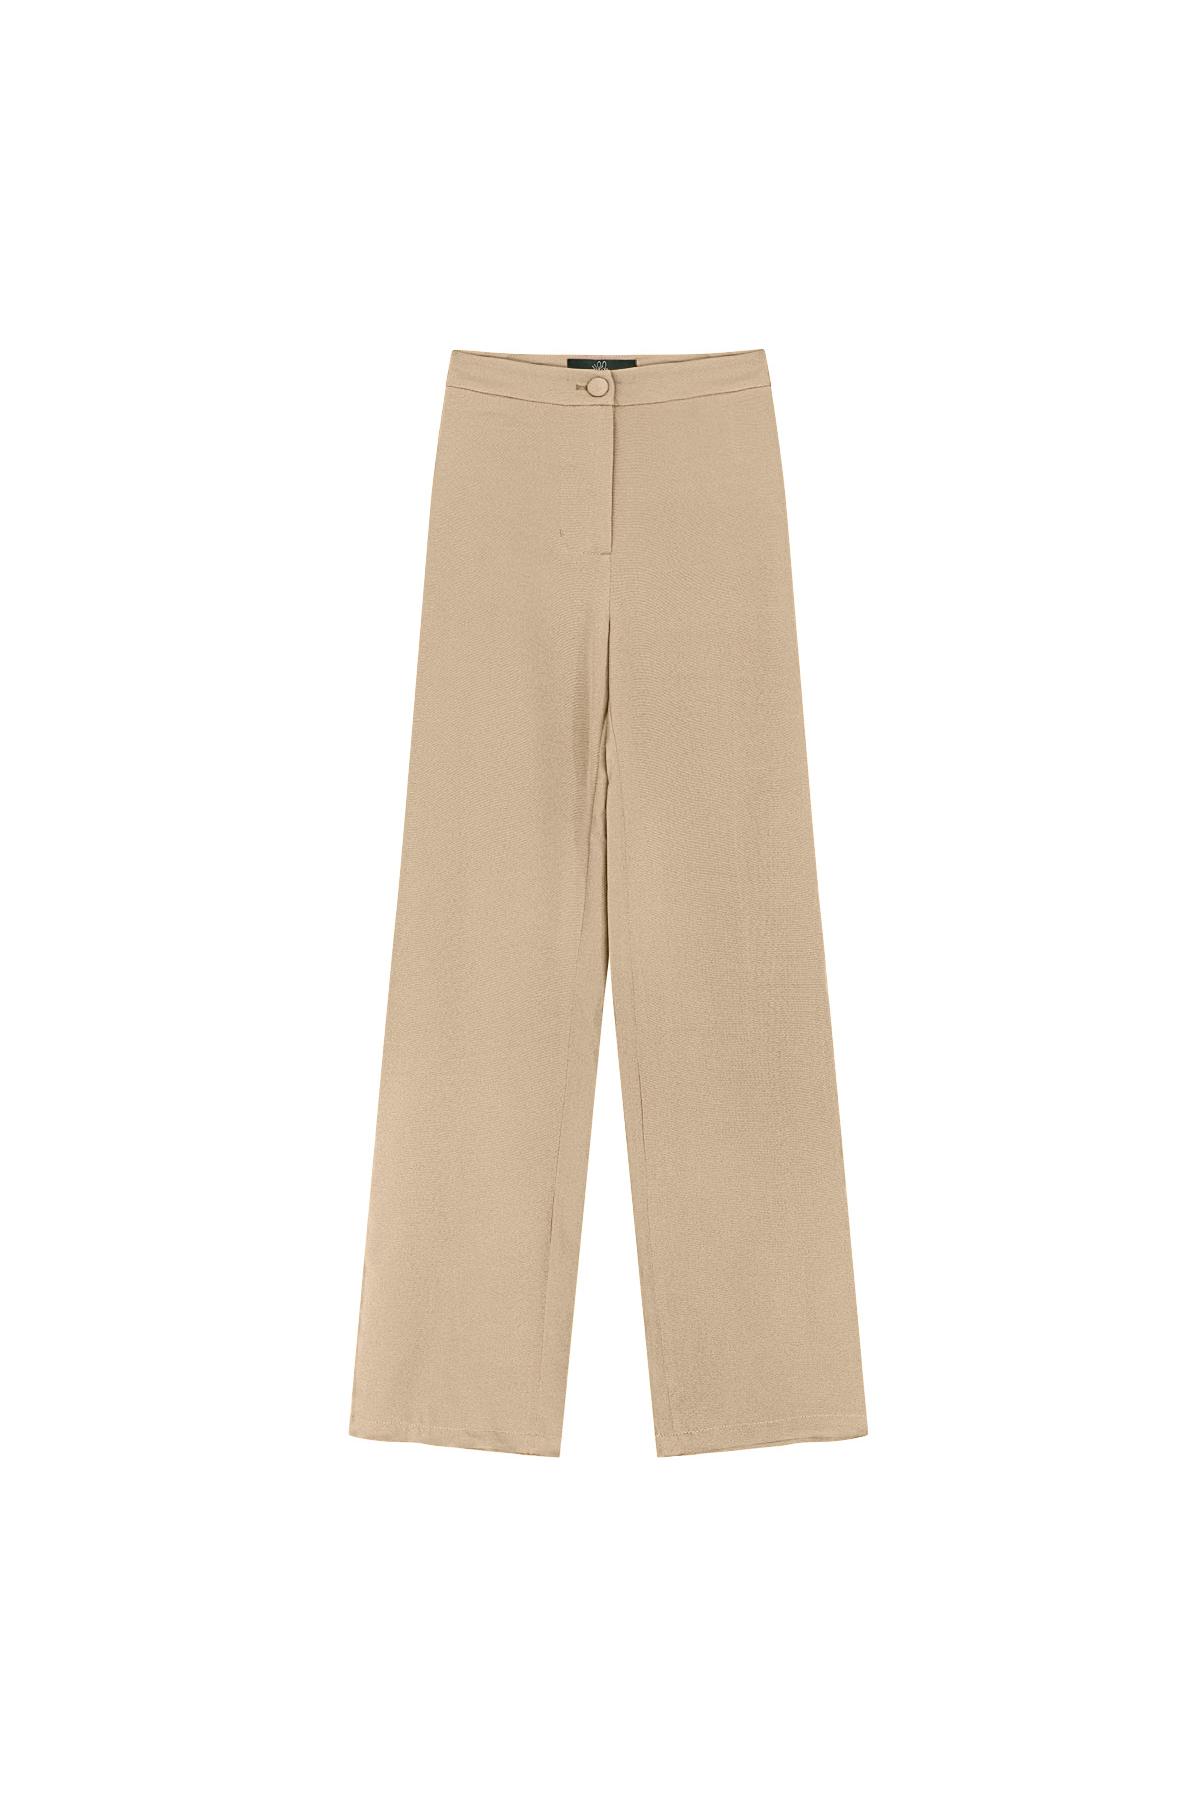 Basic plain trousers Taupe S 